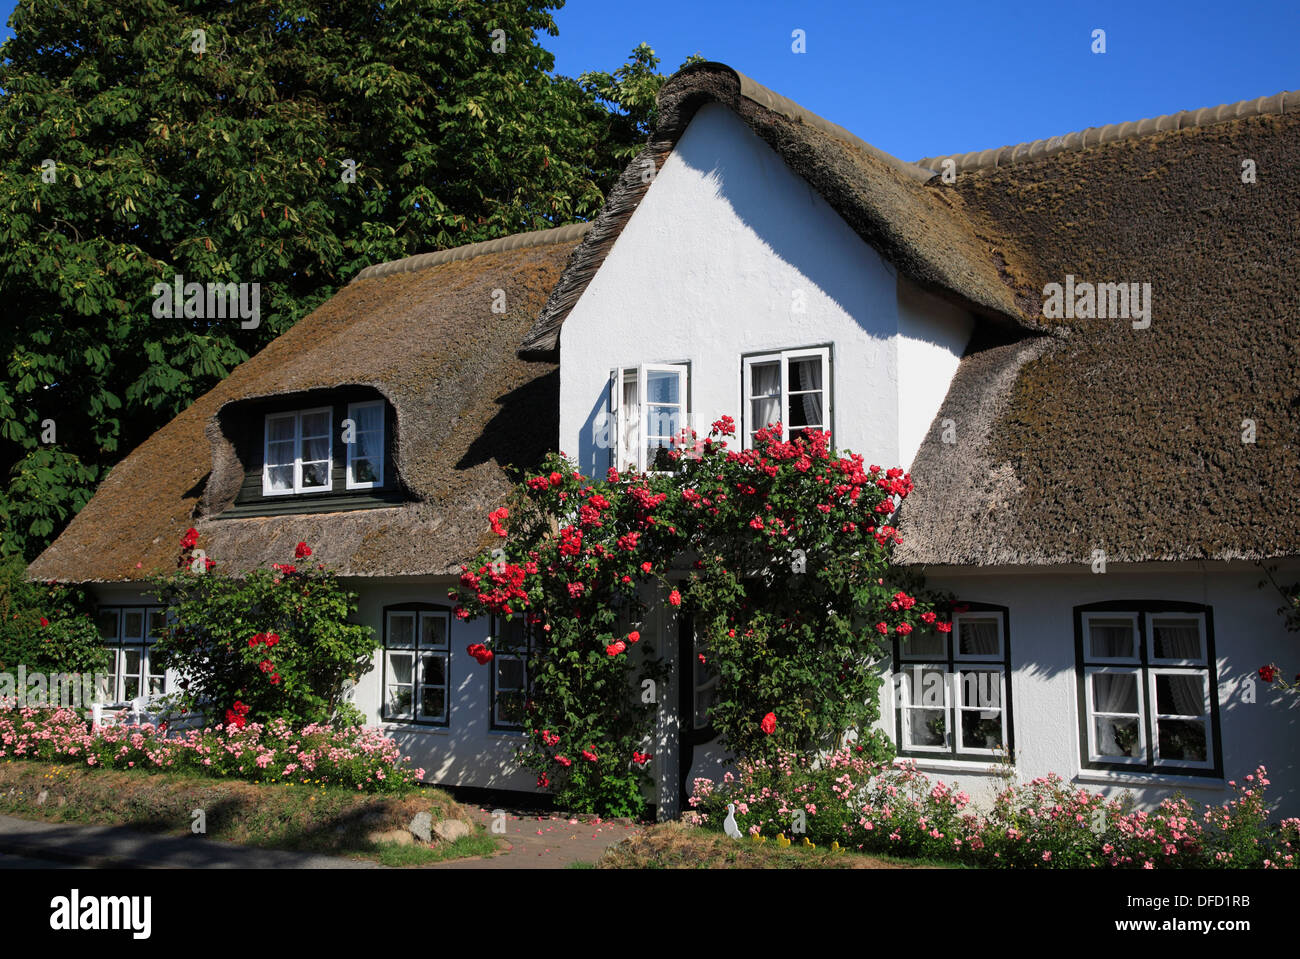 Thatched old Frisian house in Keitum, Sylt Island, Schleswig-Holstein, Germany Stock Photo